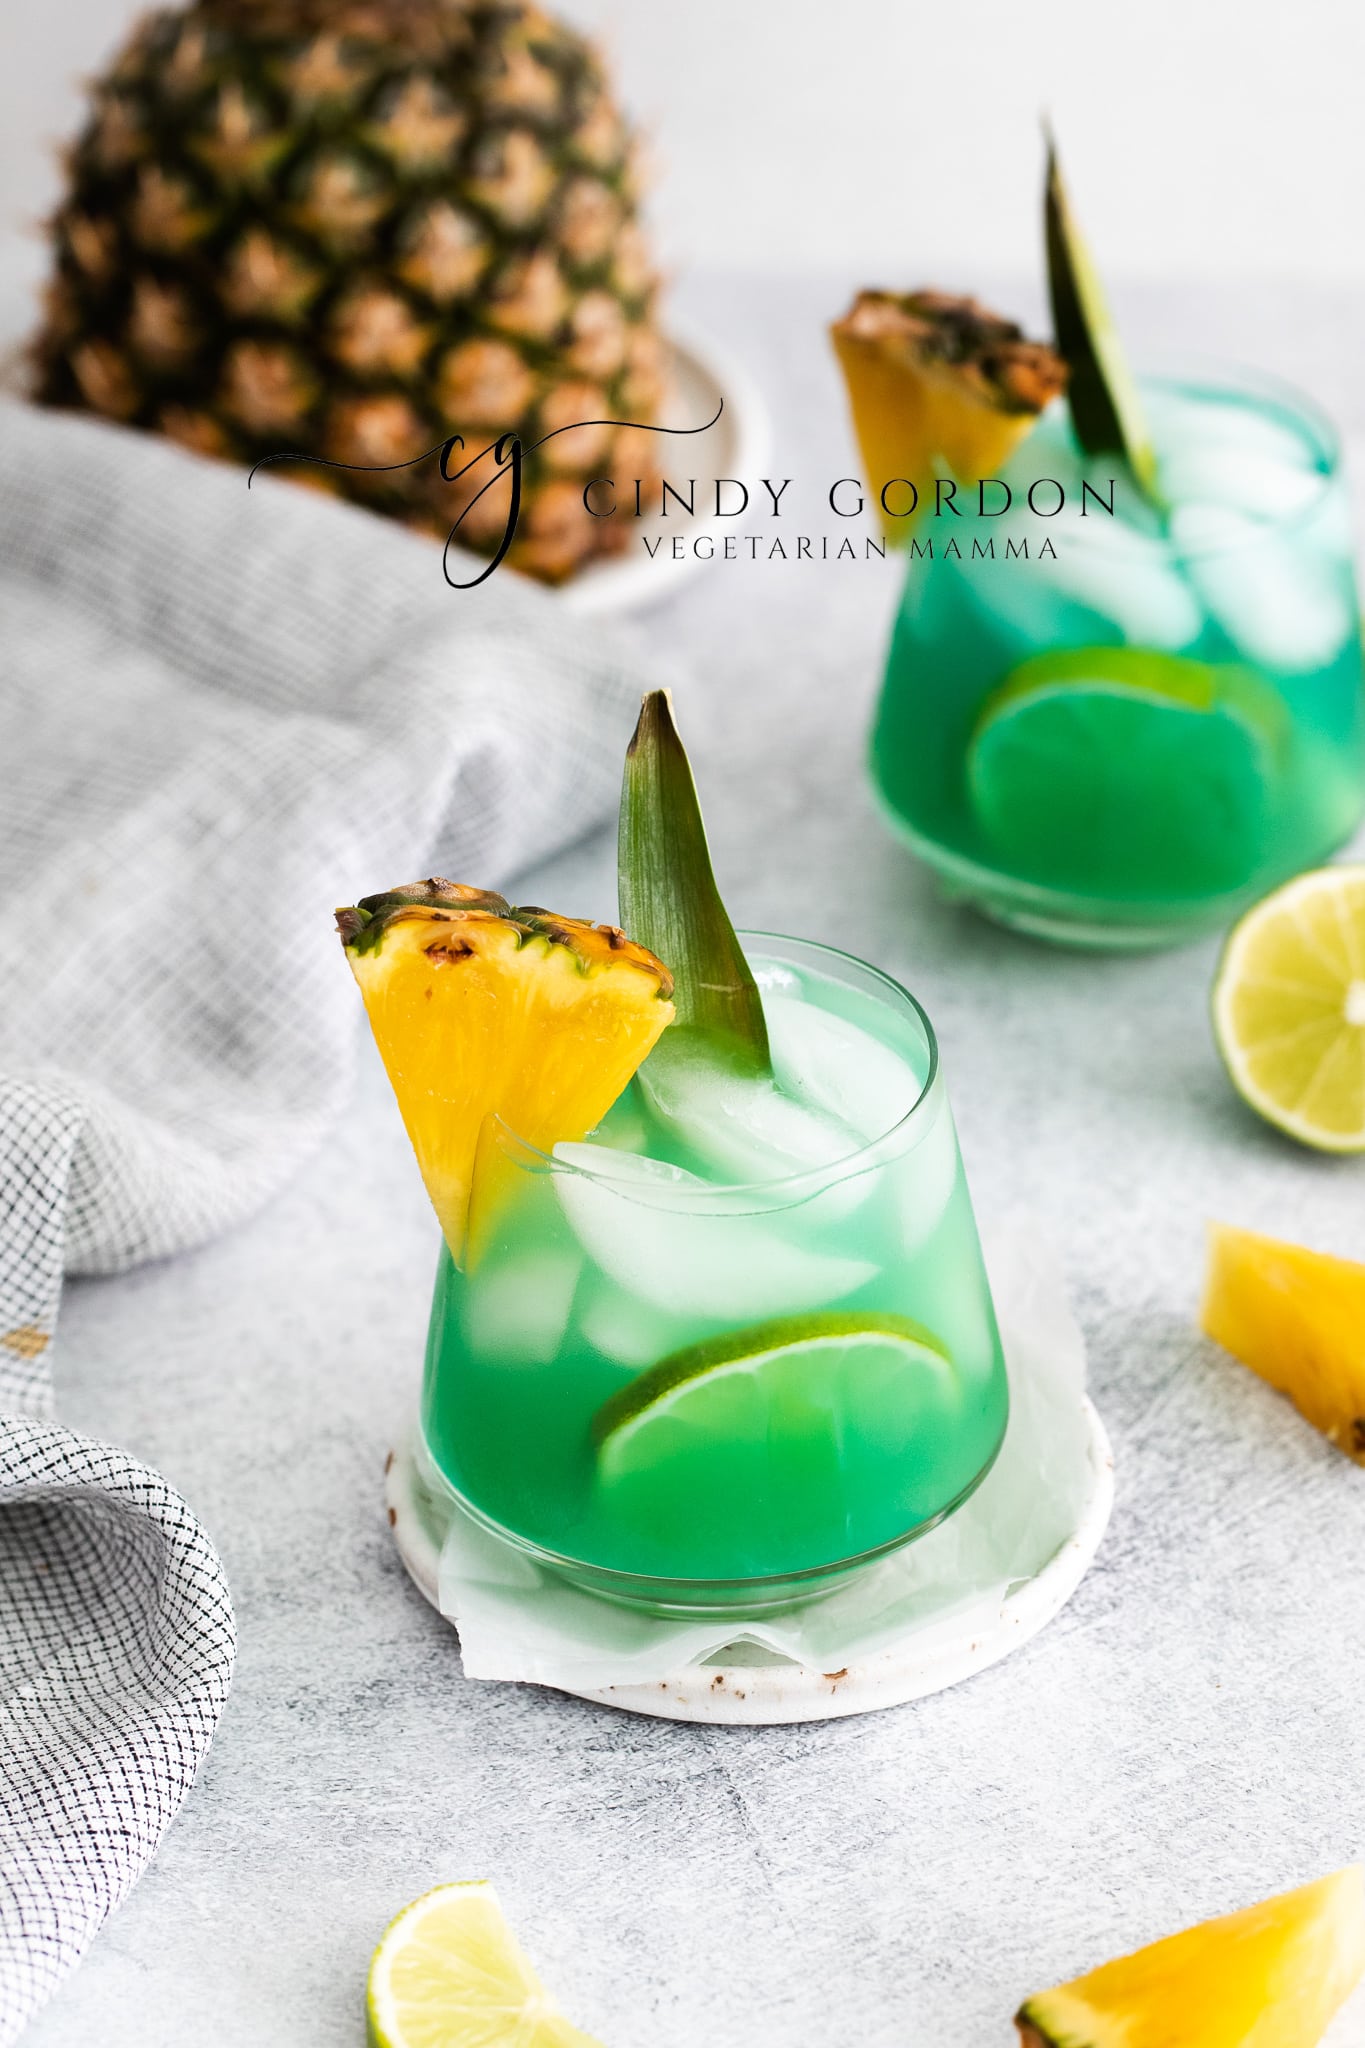 Pictured is two short glasses of mermaid water drink. The glasses are full of a blue green liquid with ice cubes. There is a pineapple chunk on the side of the glasses. A large pineapple in the background and lime slices on the table 